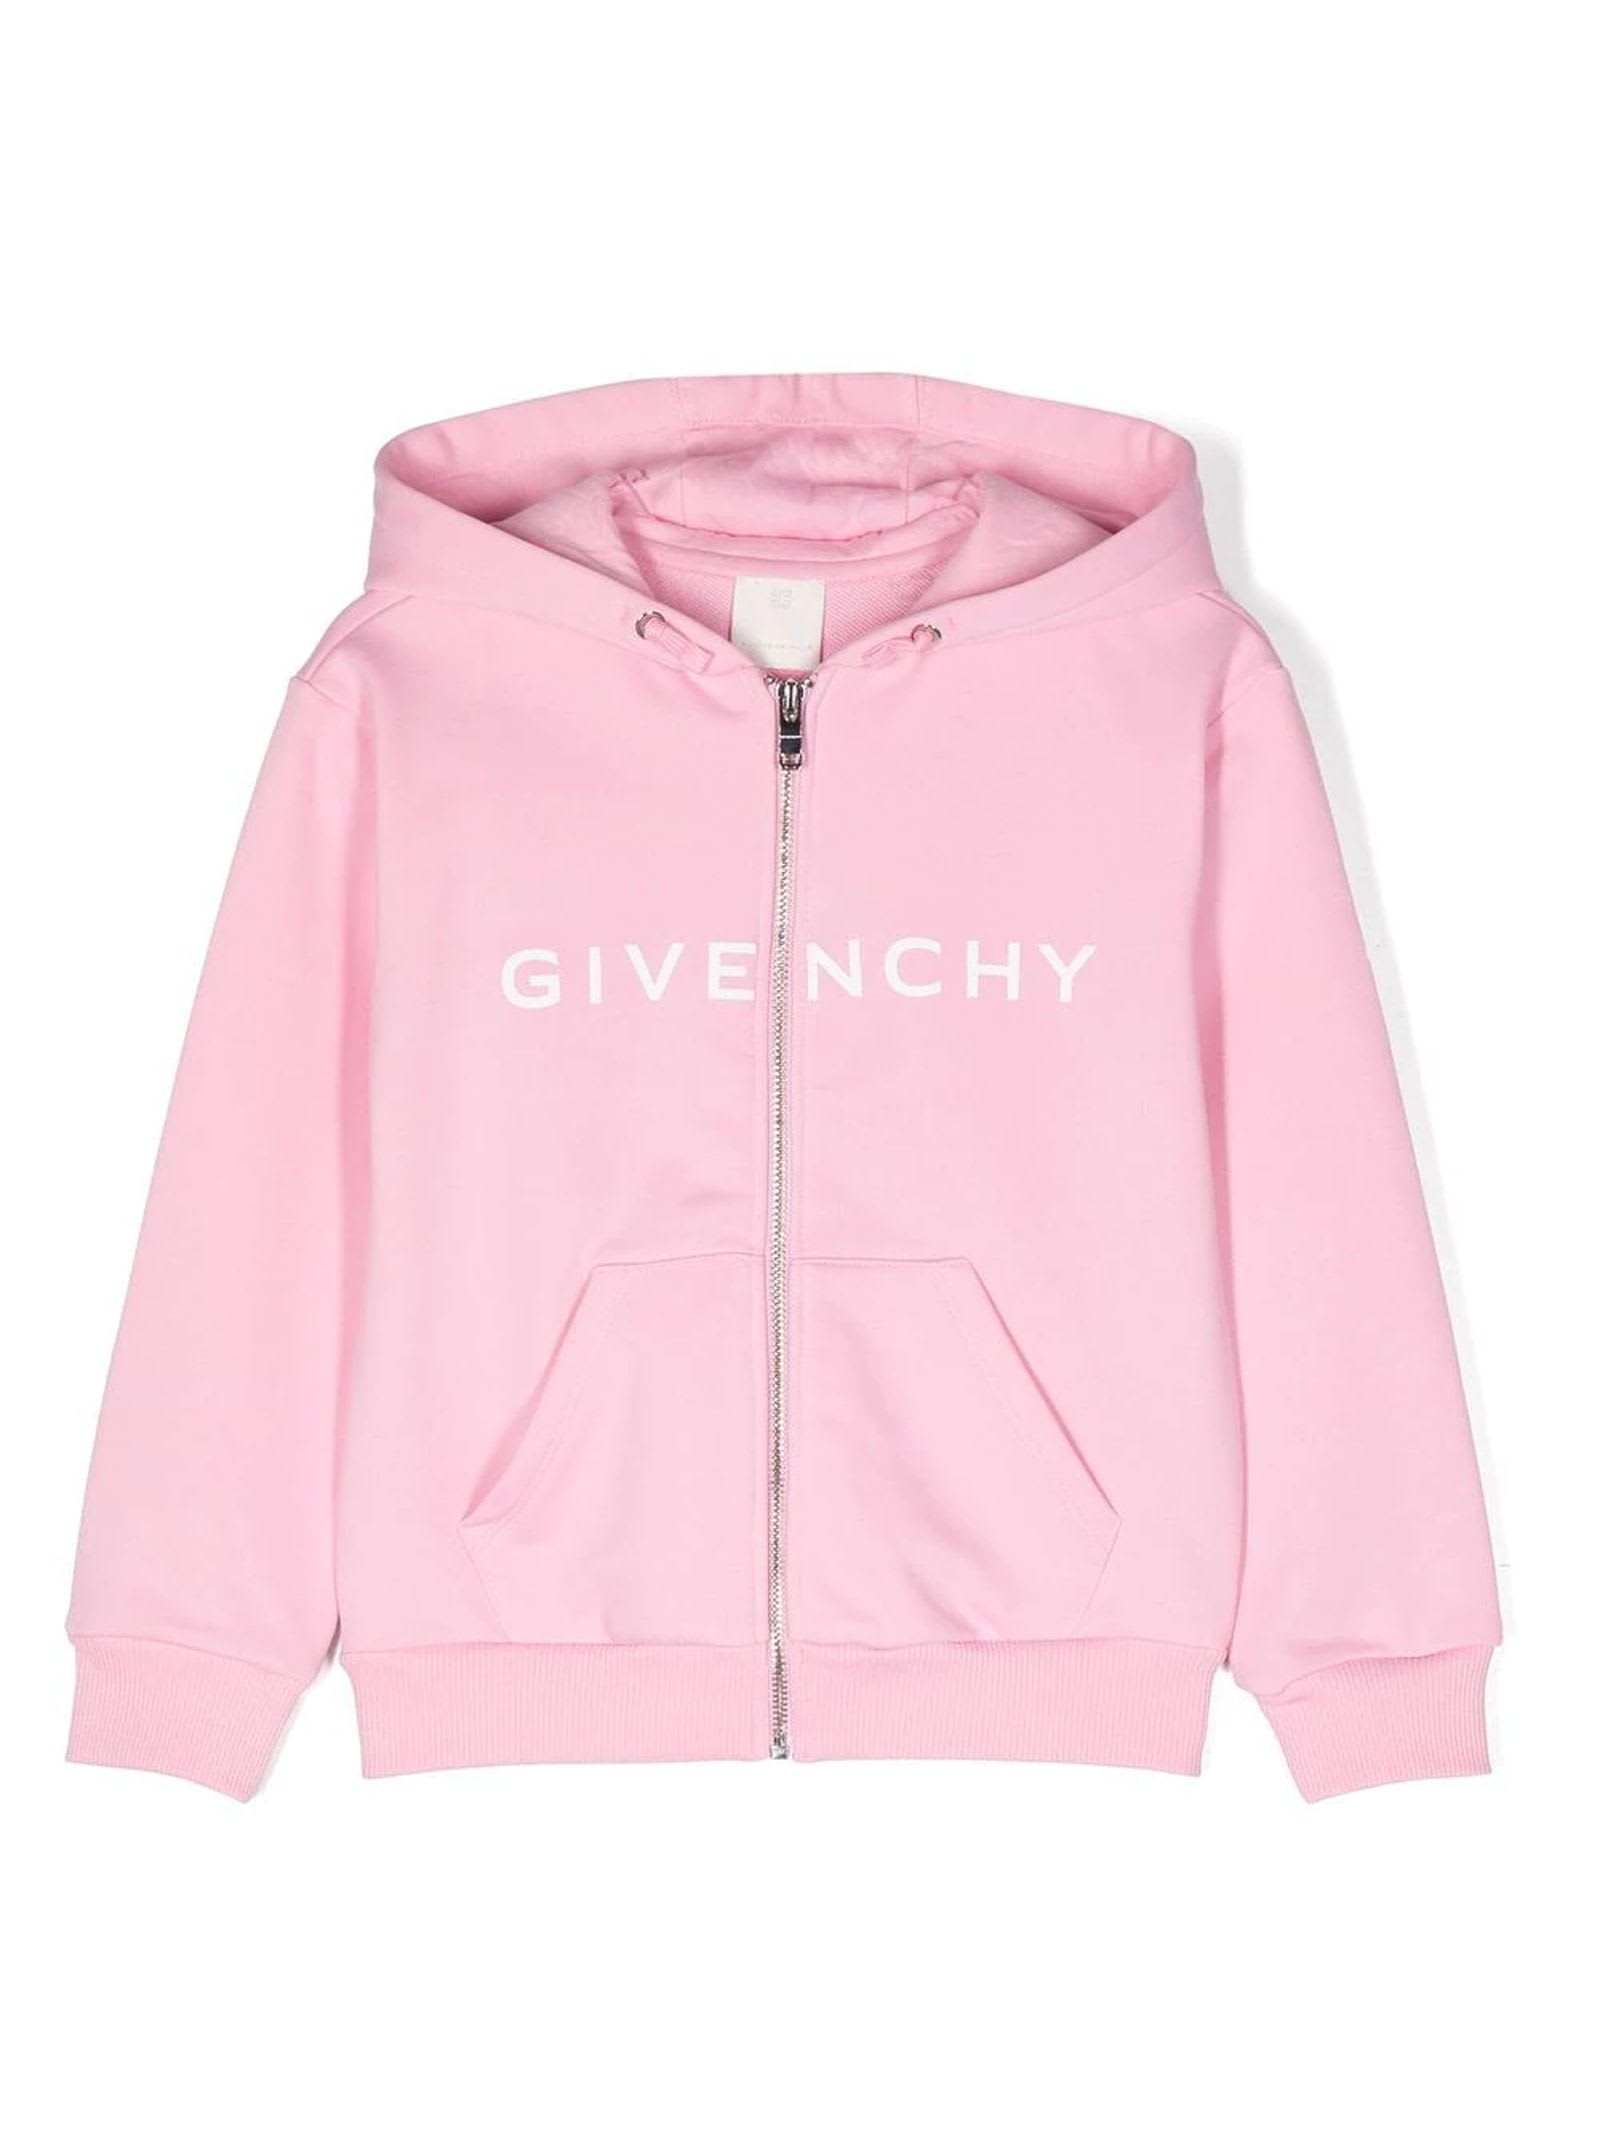 GIVENCHY PINK COTTON HOODIE